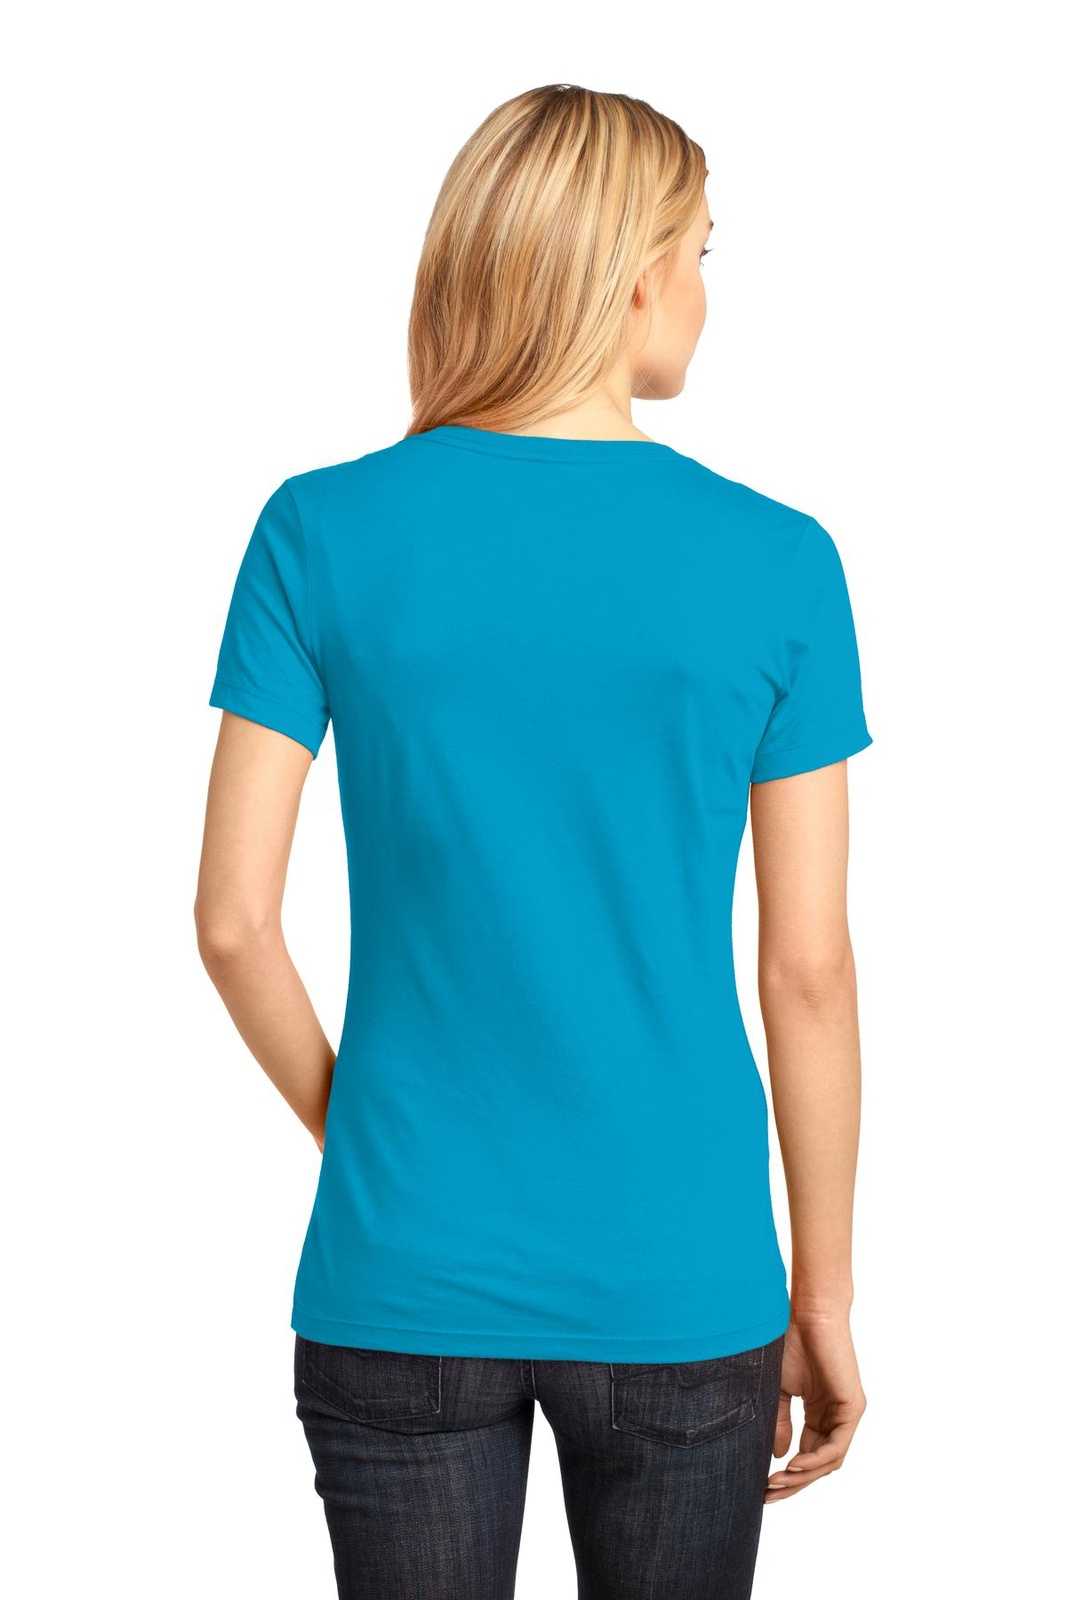 District DM1170L Women's Perfect Weight V-Neck Tee - Bright Turquoise - HIT a Double - 1